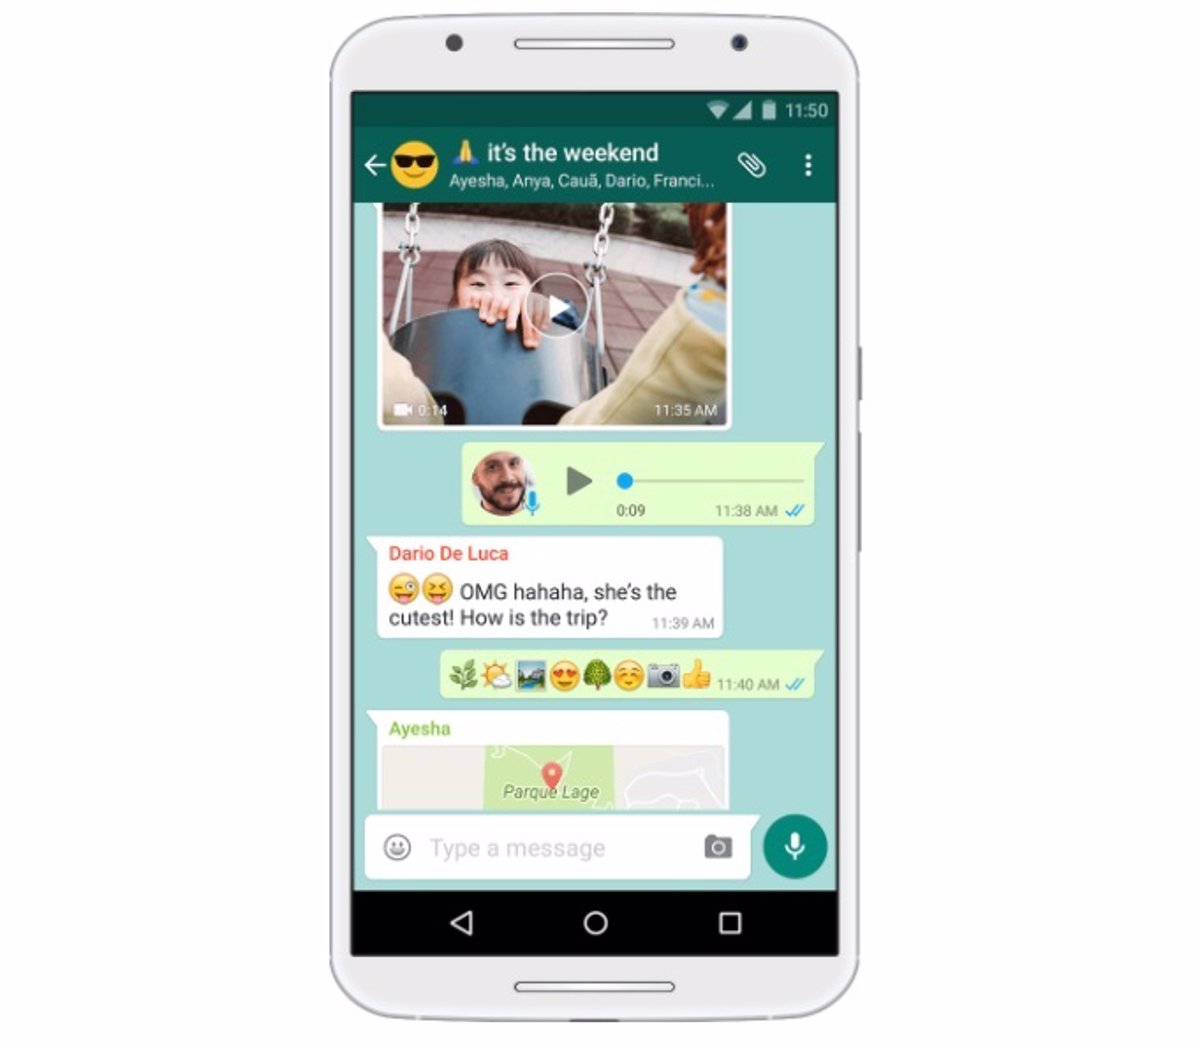 In the Android beta, WhatsApp adds additional emoticons such as a slide, a tire, and a melted face